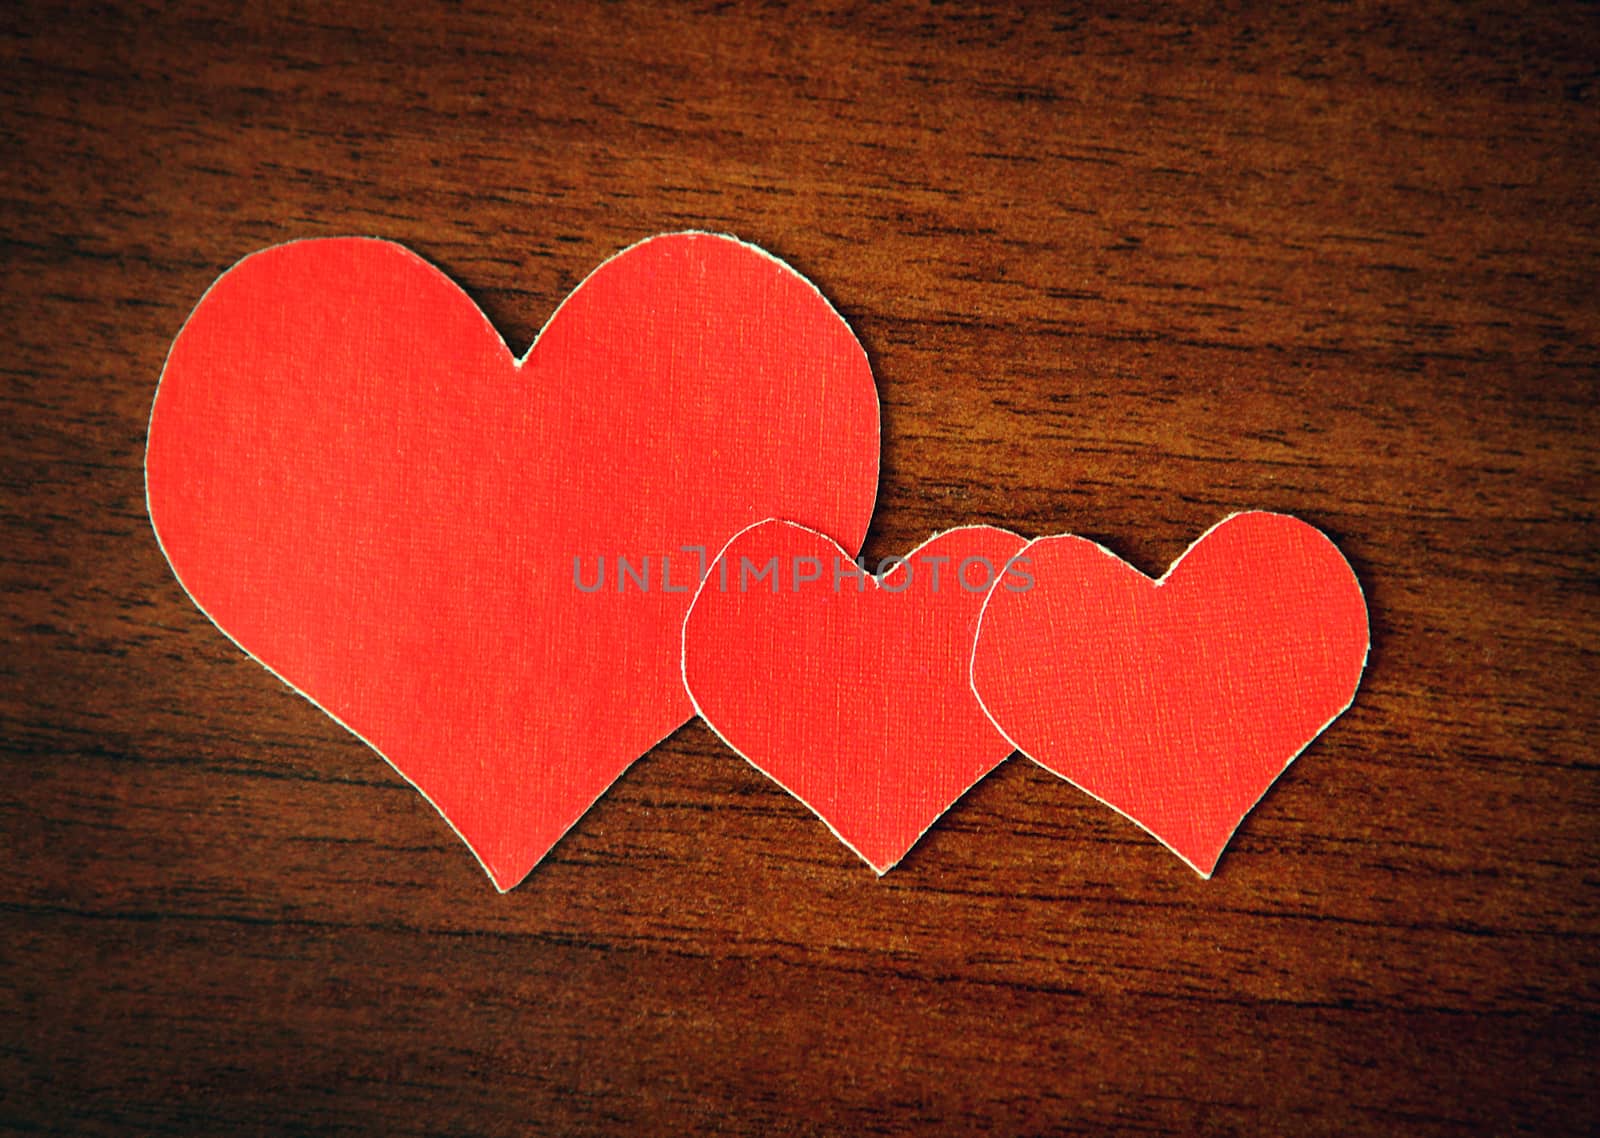 Heart Shapes on the Wooden Background by sabphoto